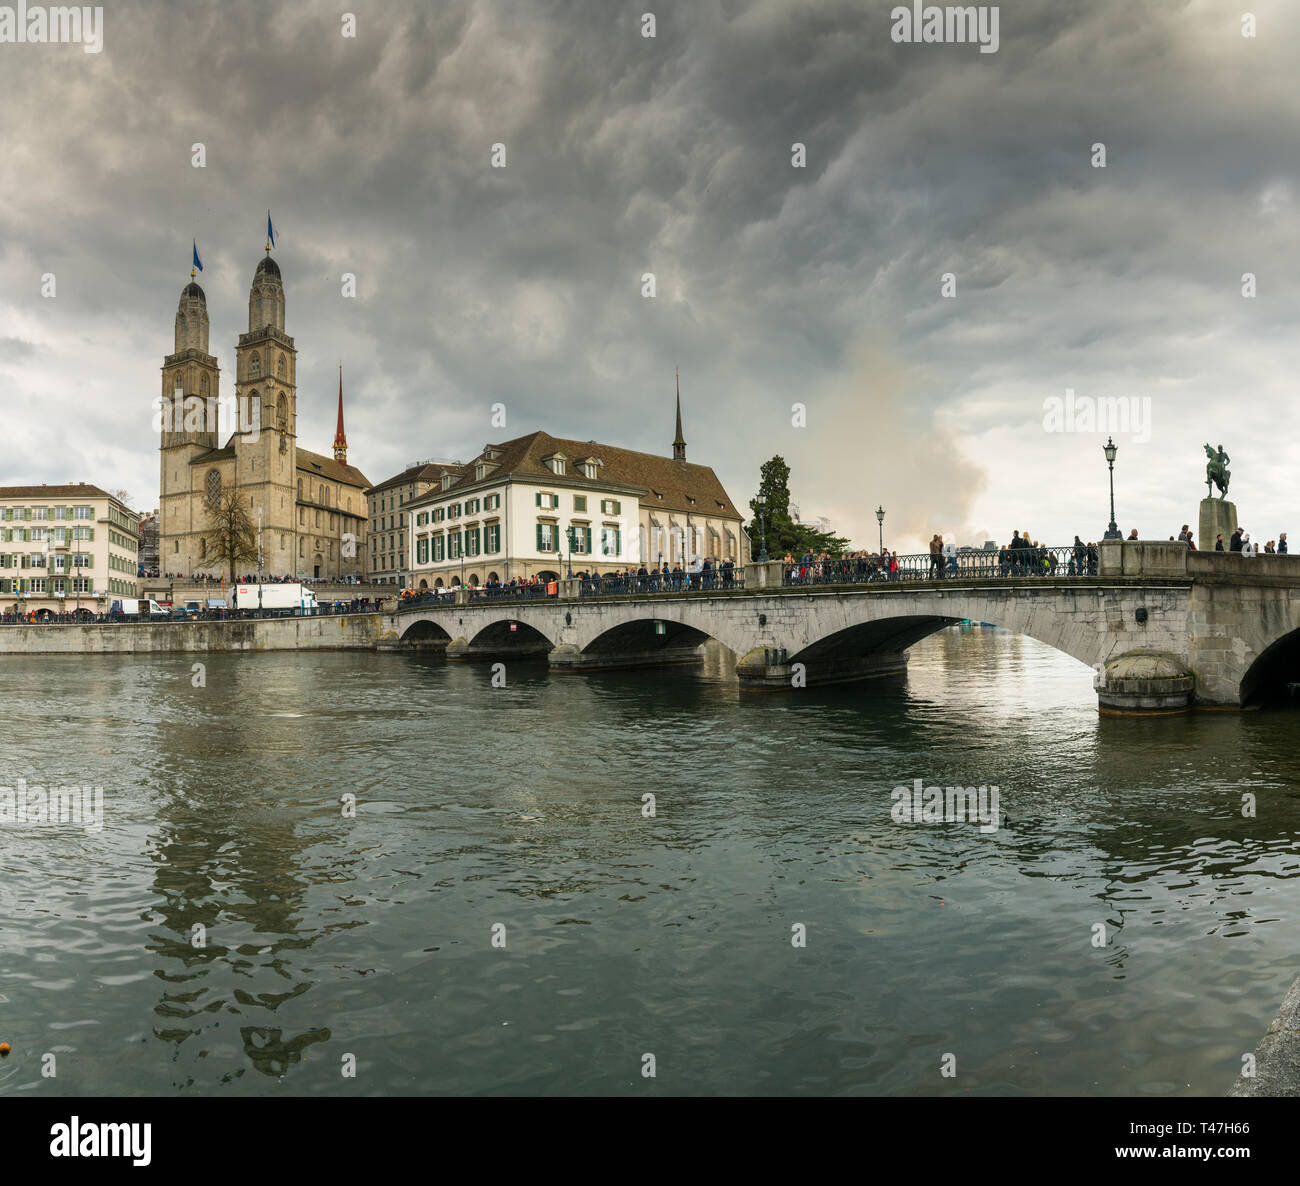 Zurich, ZH / Switzerland - April 8, 2019: Zurich cityscape with many people crossing the river Limmat during the traditional spring festival of Sechse Stock Photo